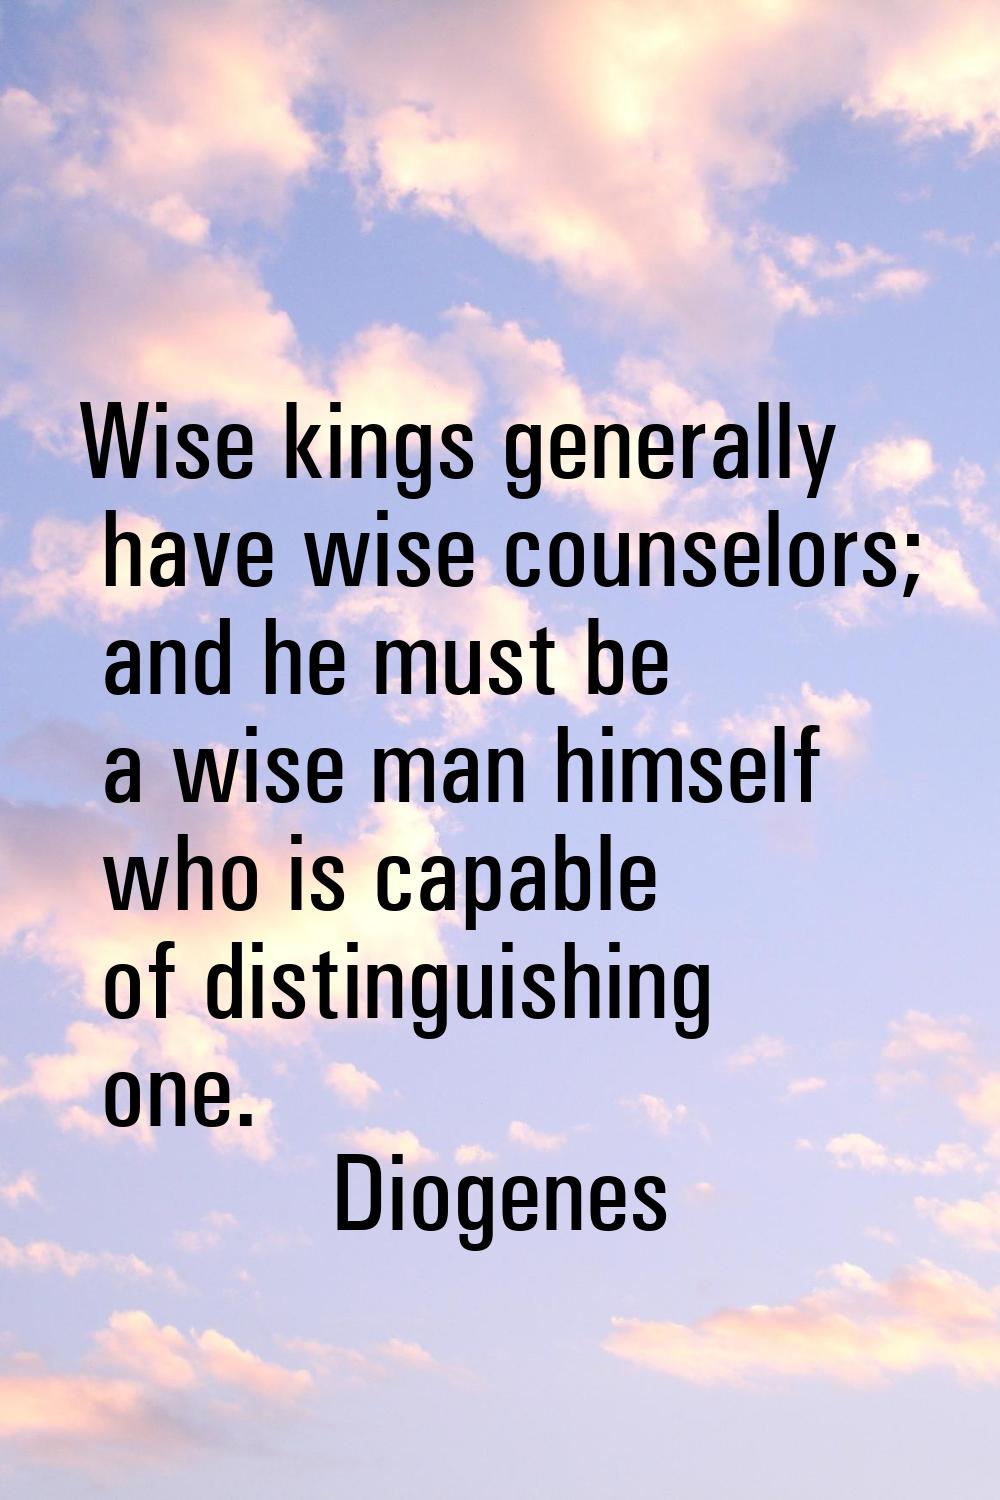 Wise kings generally have wise counselors; and he must be a wise man himself who is capable of dist